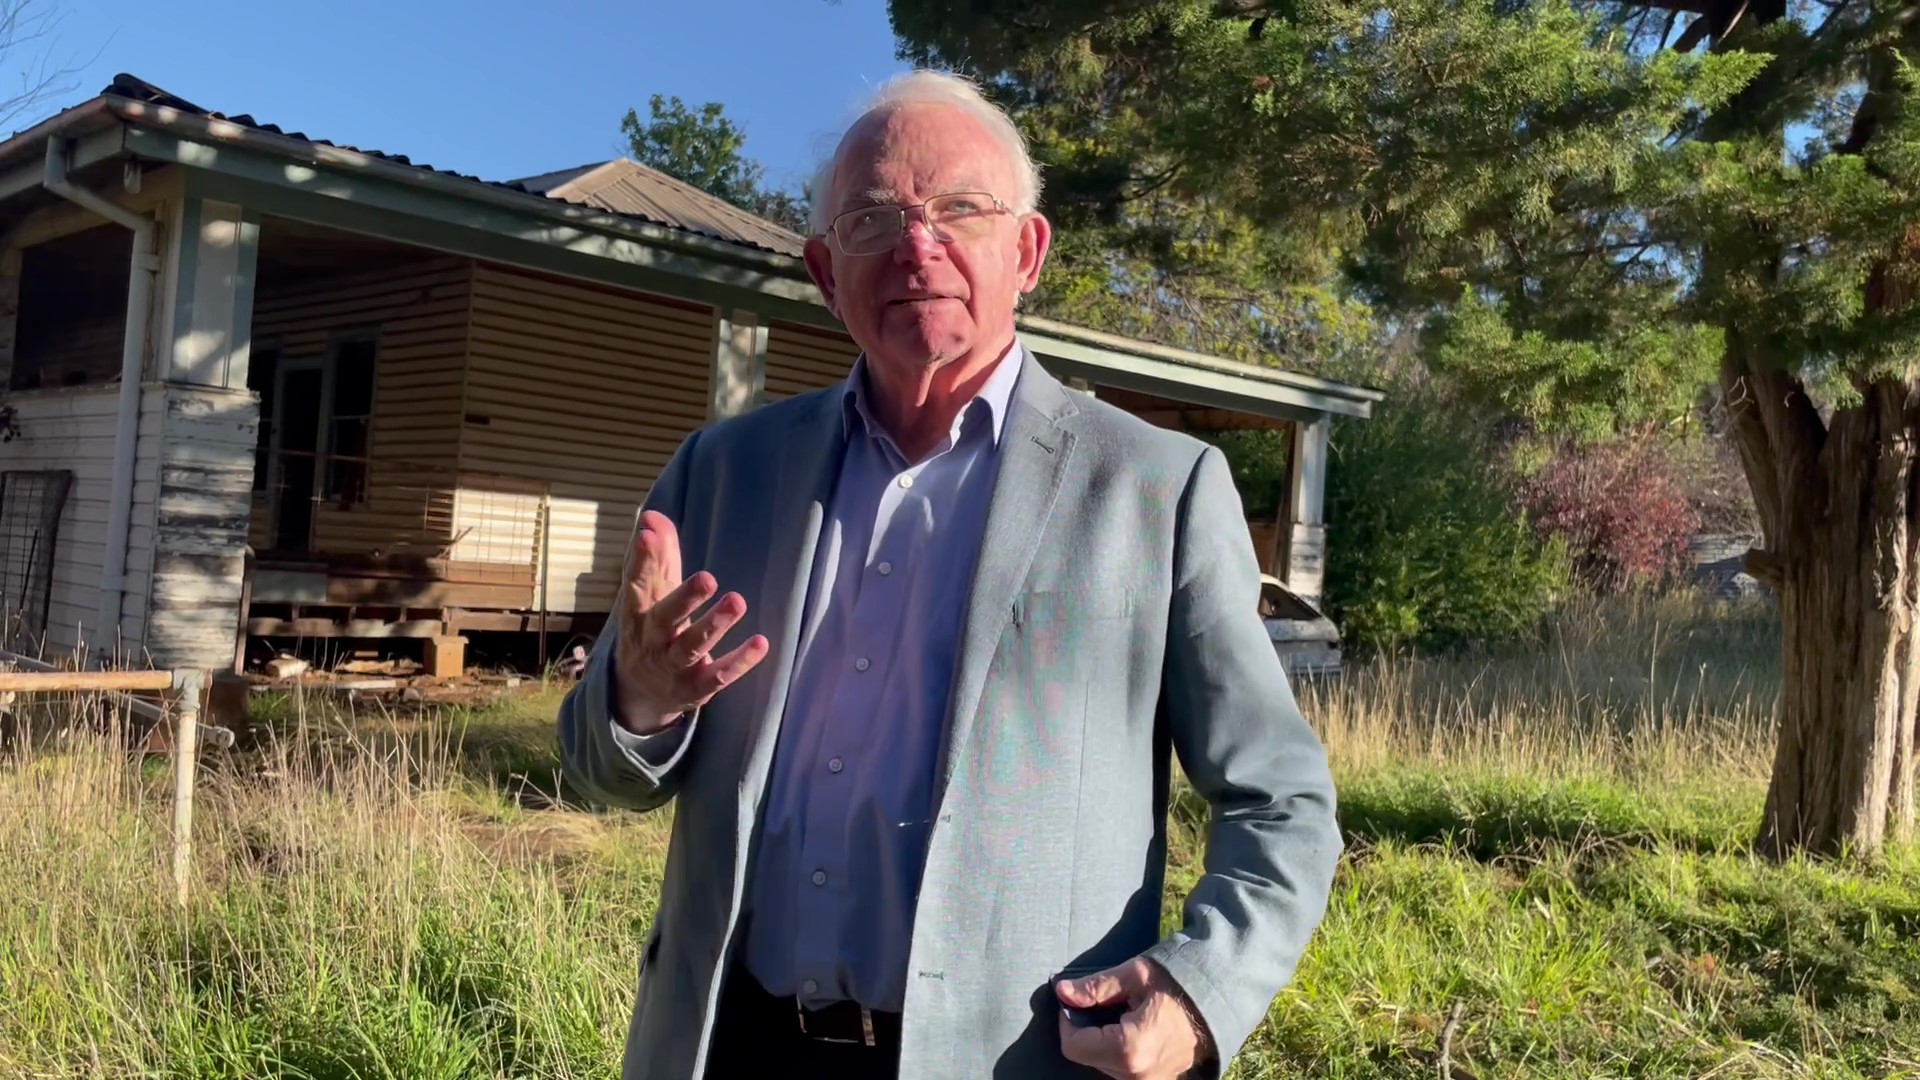 David Hill at the remains of the Fairbridge Farm School site in Molong, NSW